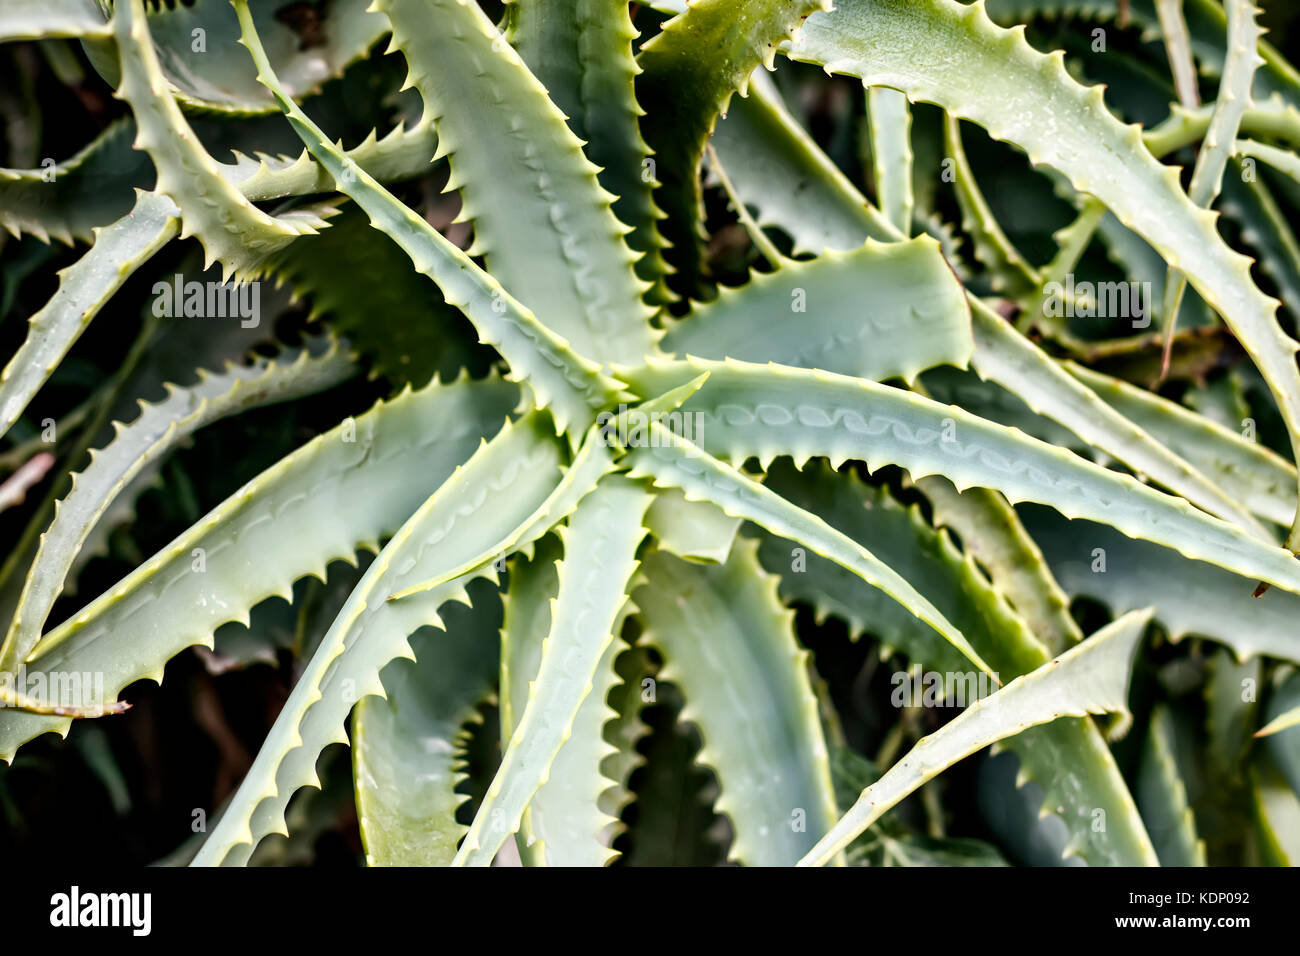 Top view of the aloe plant Stock Photo